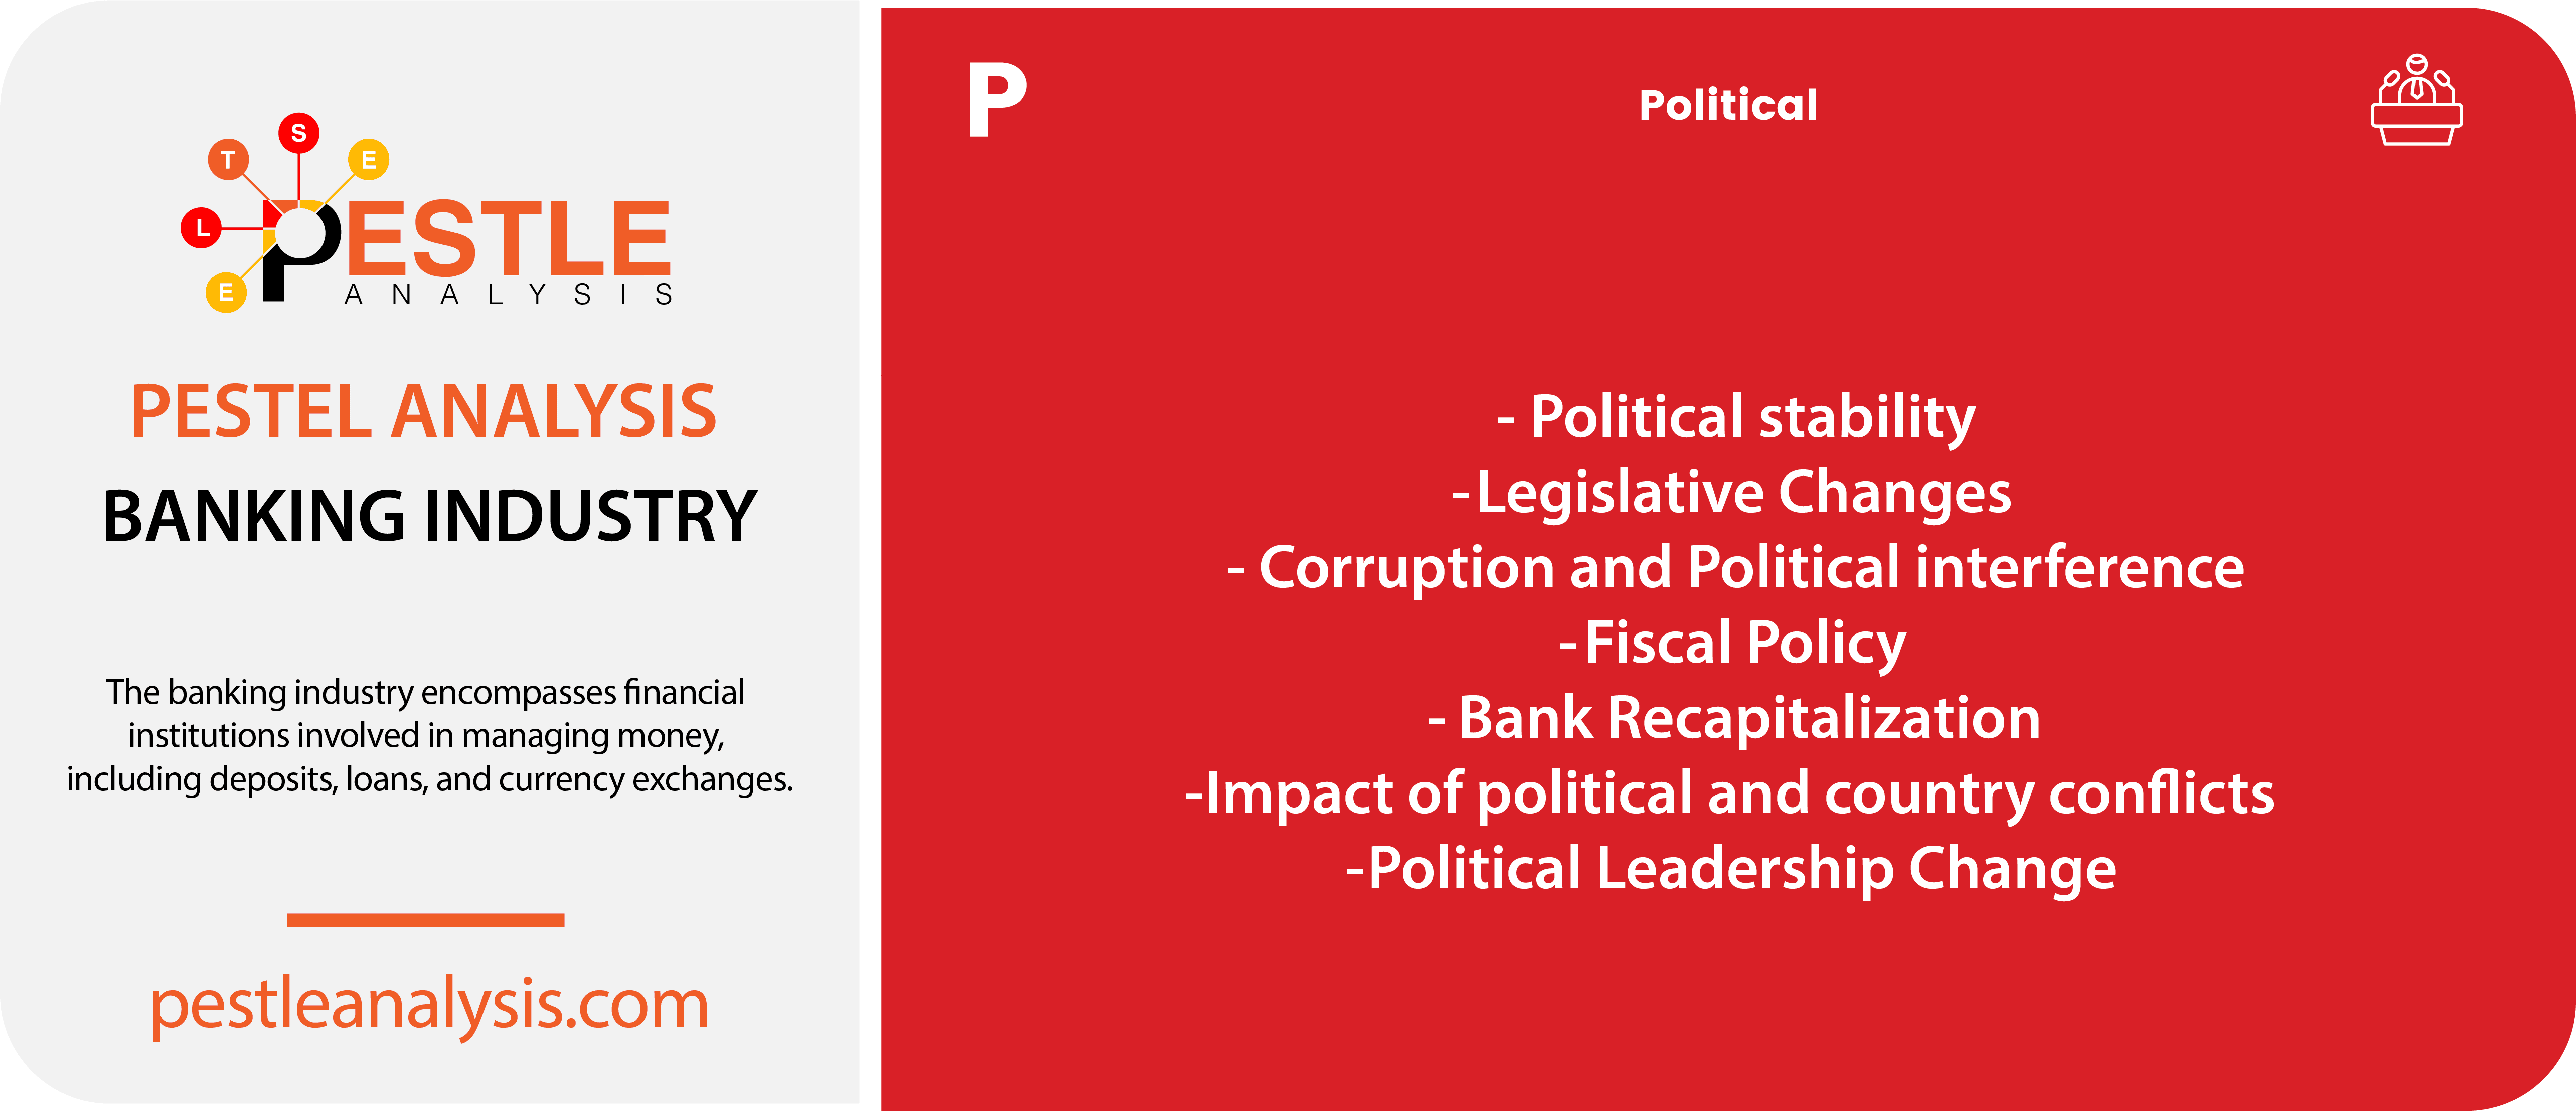 banking-industry-pestle-analysis-political-factors-template